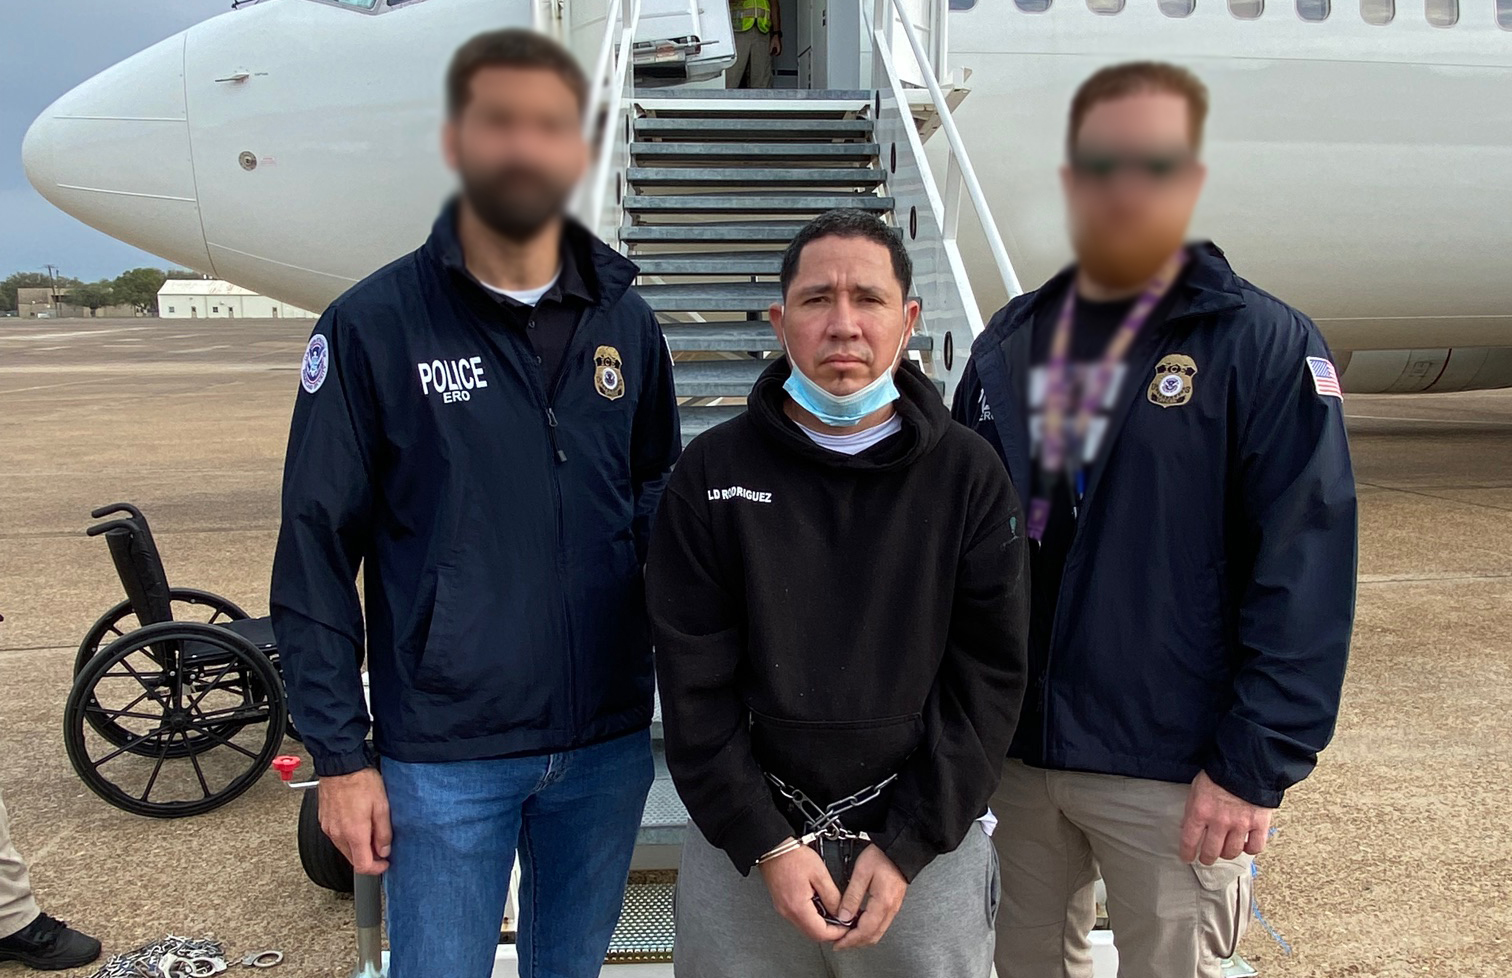 ERO removes Honduran national wanted for organizing unlawful immigration